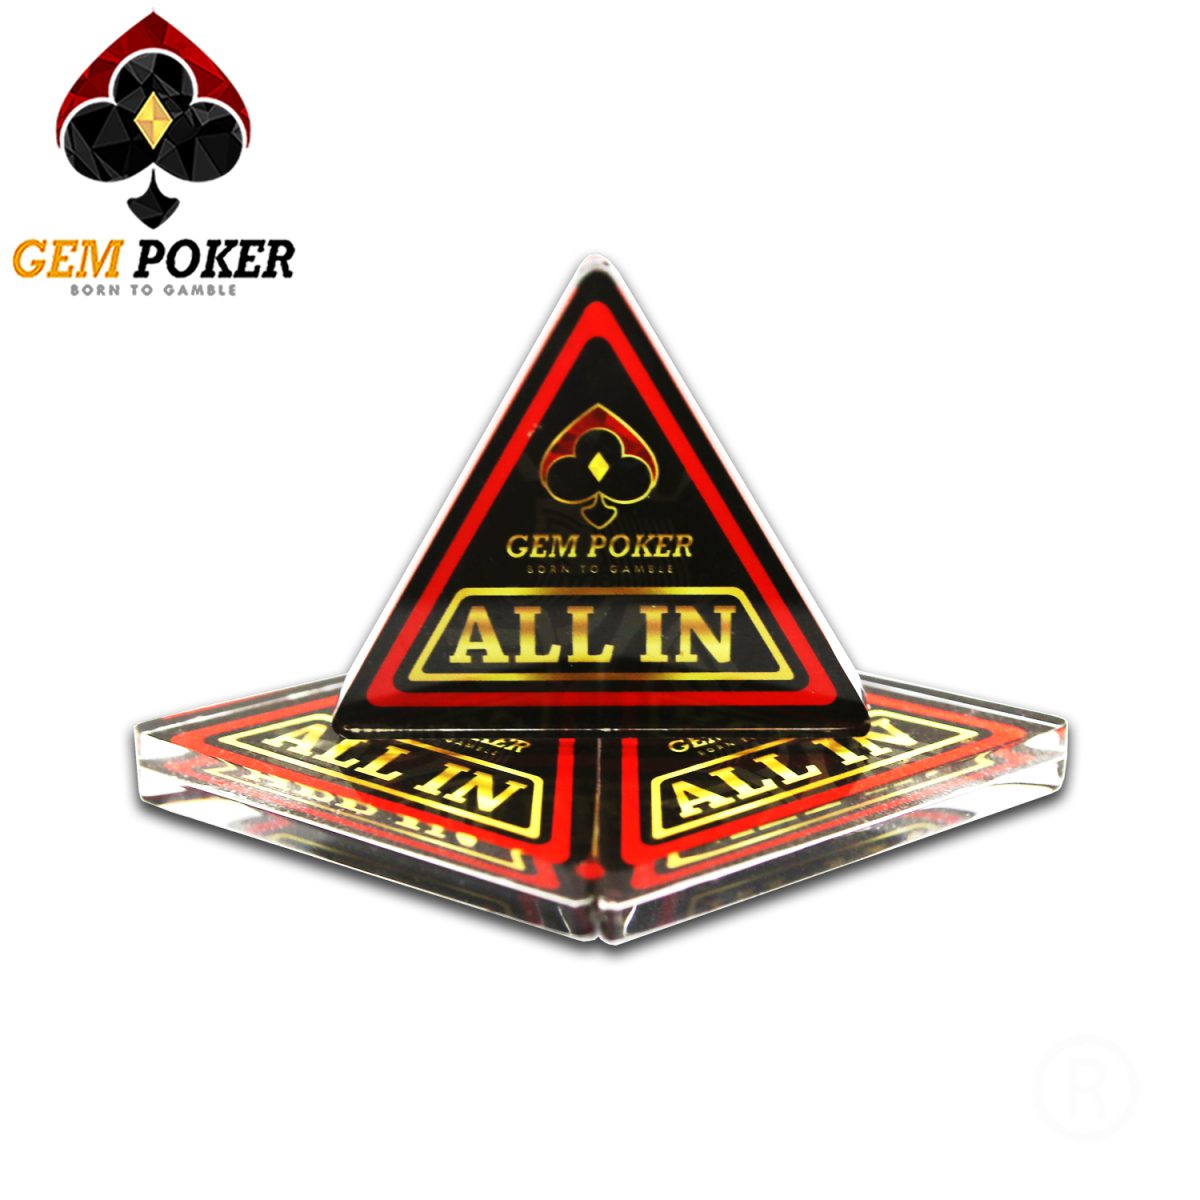 NÚT ALL-IN GEMPOKER ACRYLIC CAO CẤP - 02